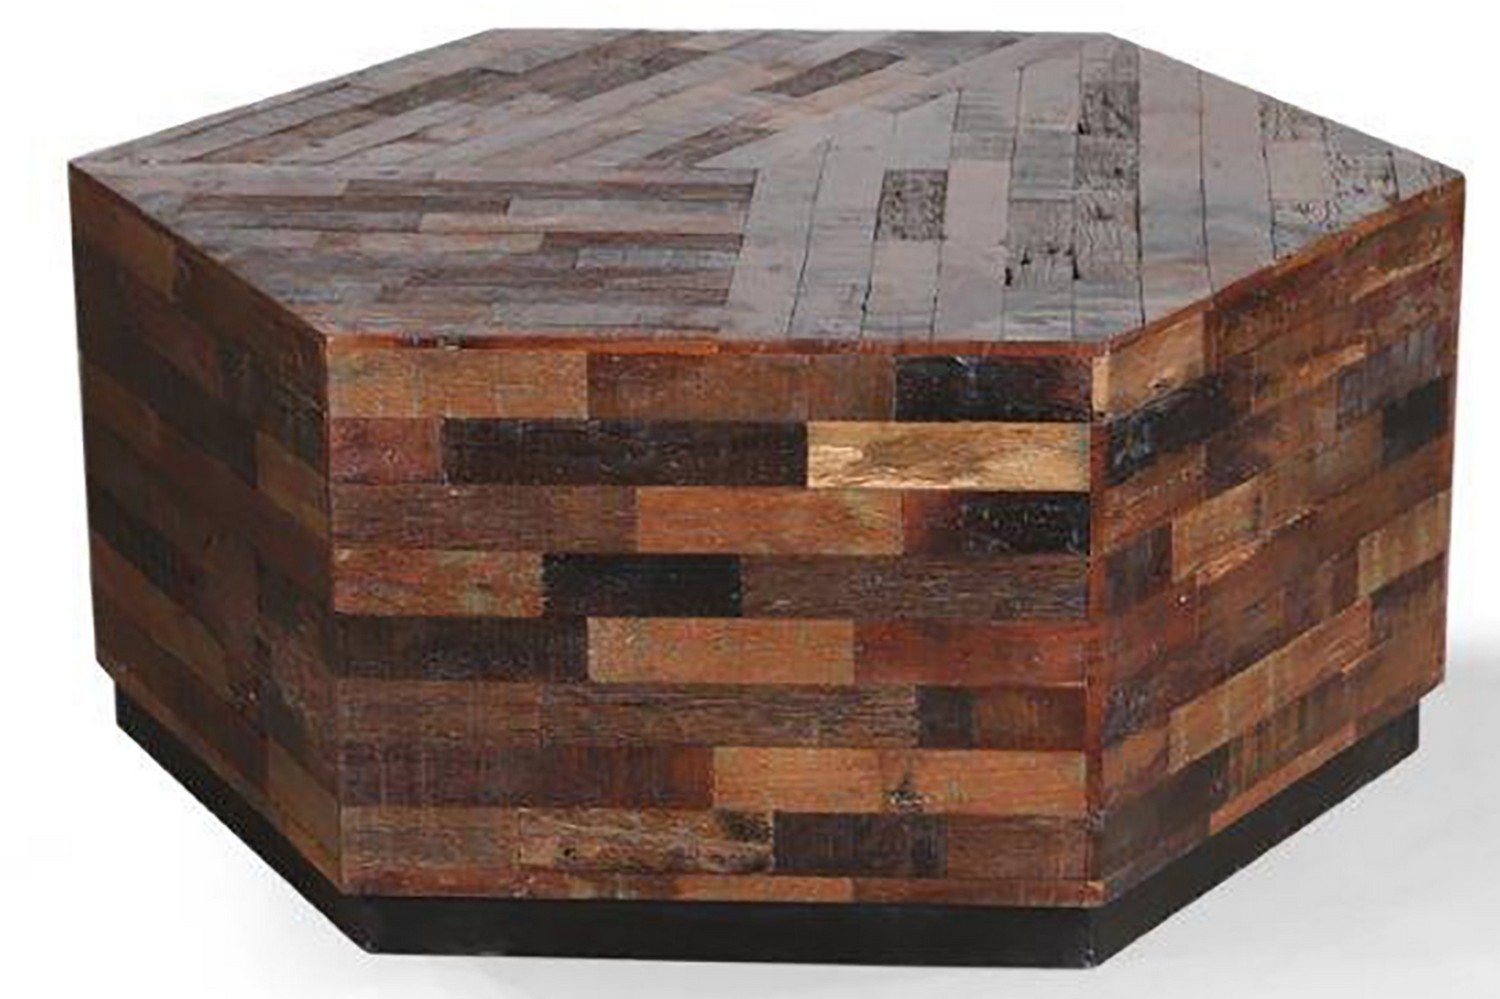 Parker House Crossings The Underground Hexagonal Cocktail Table - Reclaimed Rustic Brown